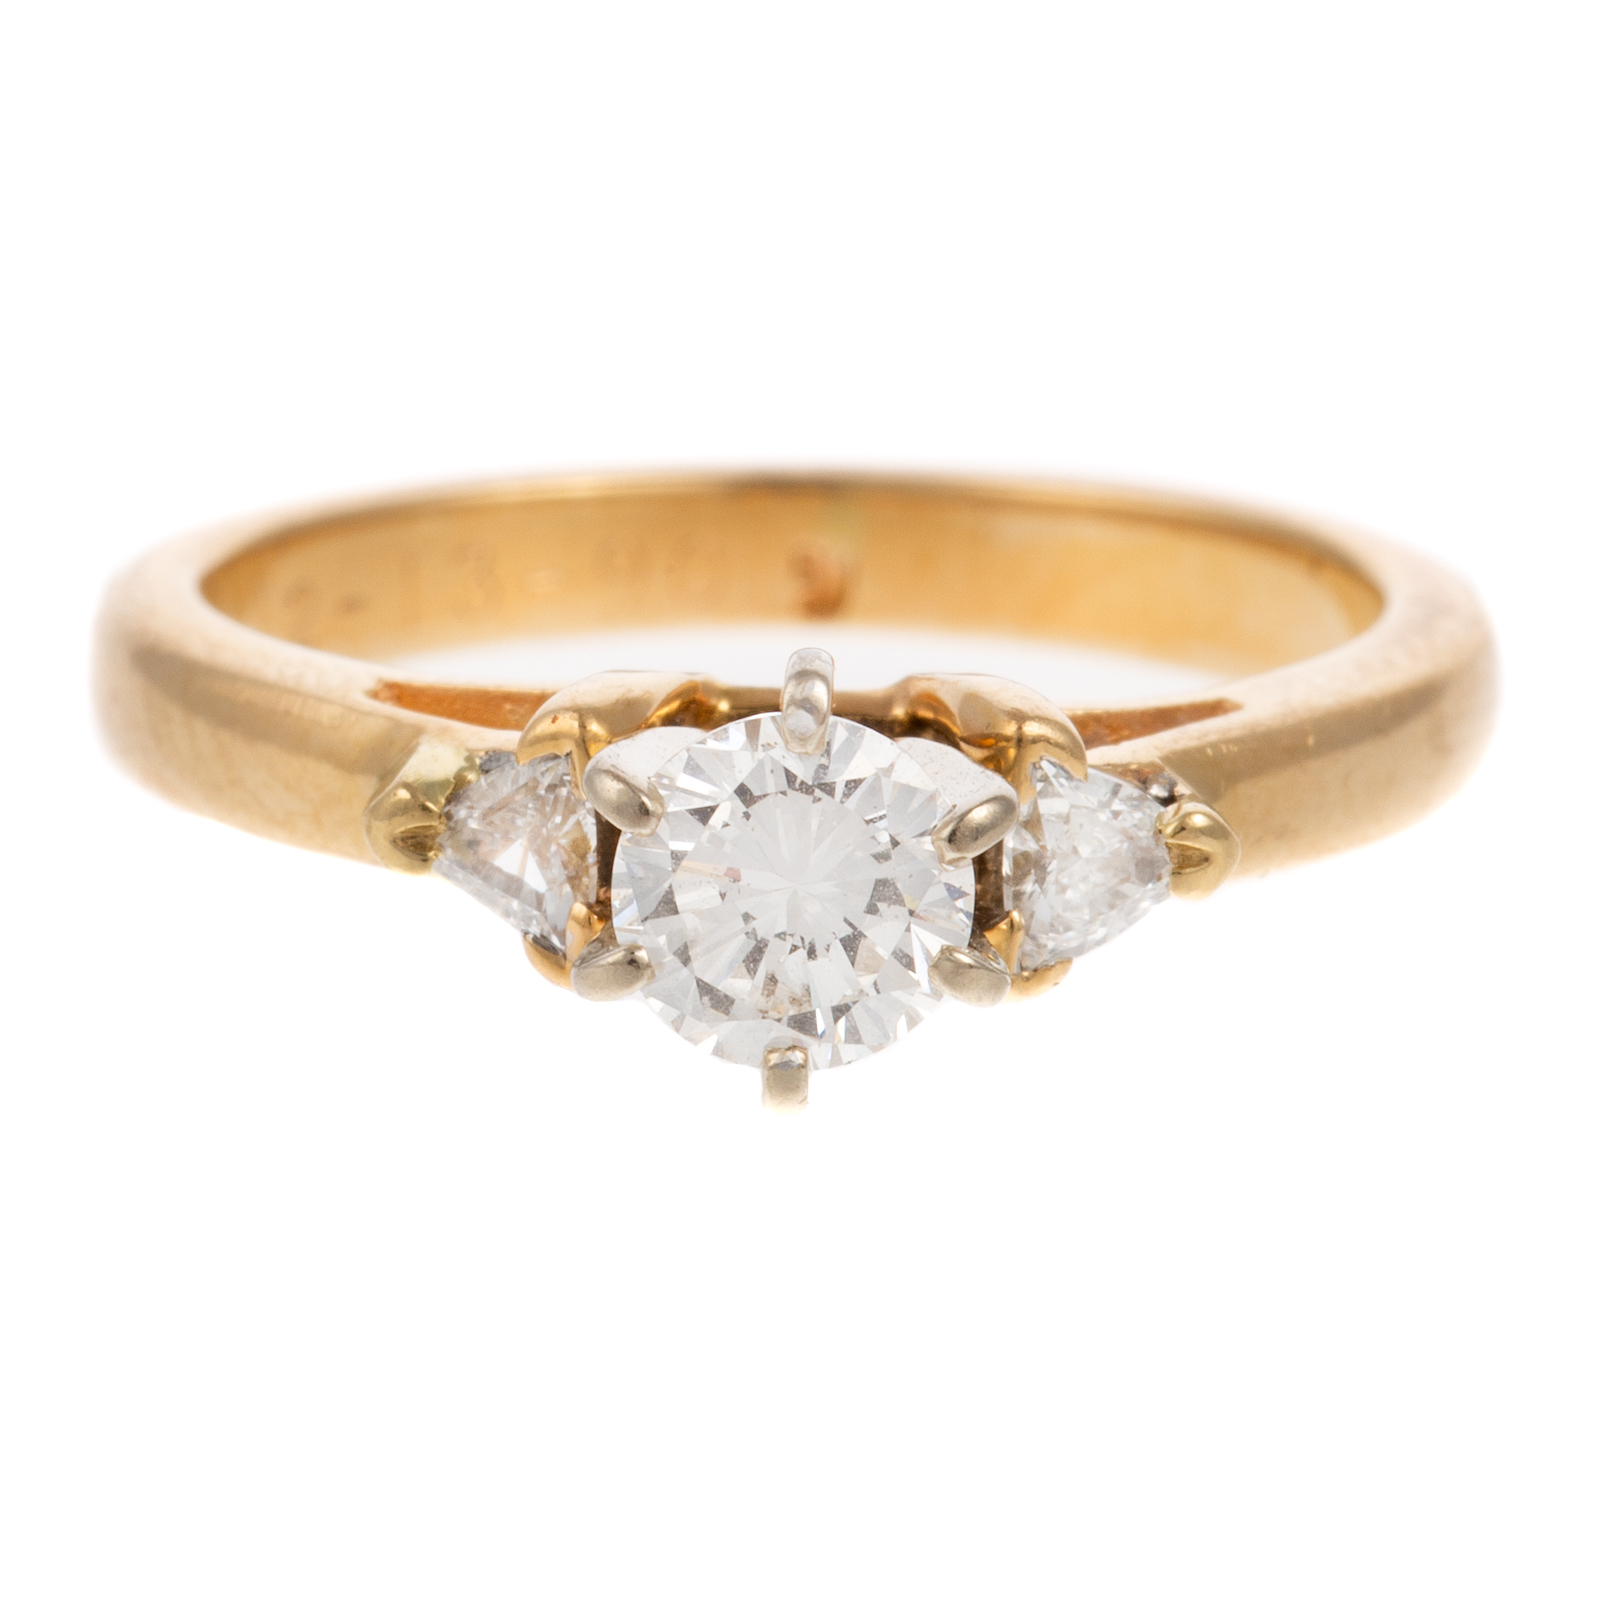 A CLASSIC DIAMOND ENGAGEMENT RING